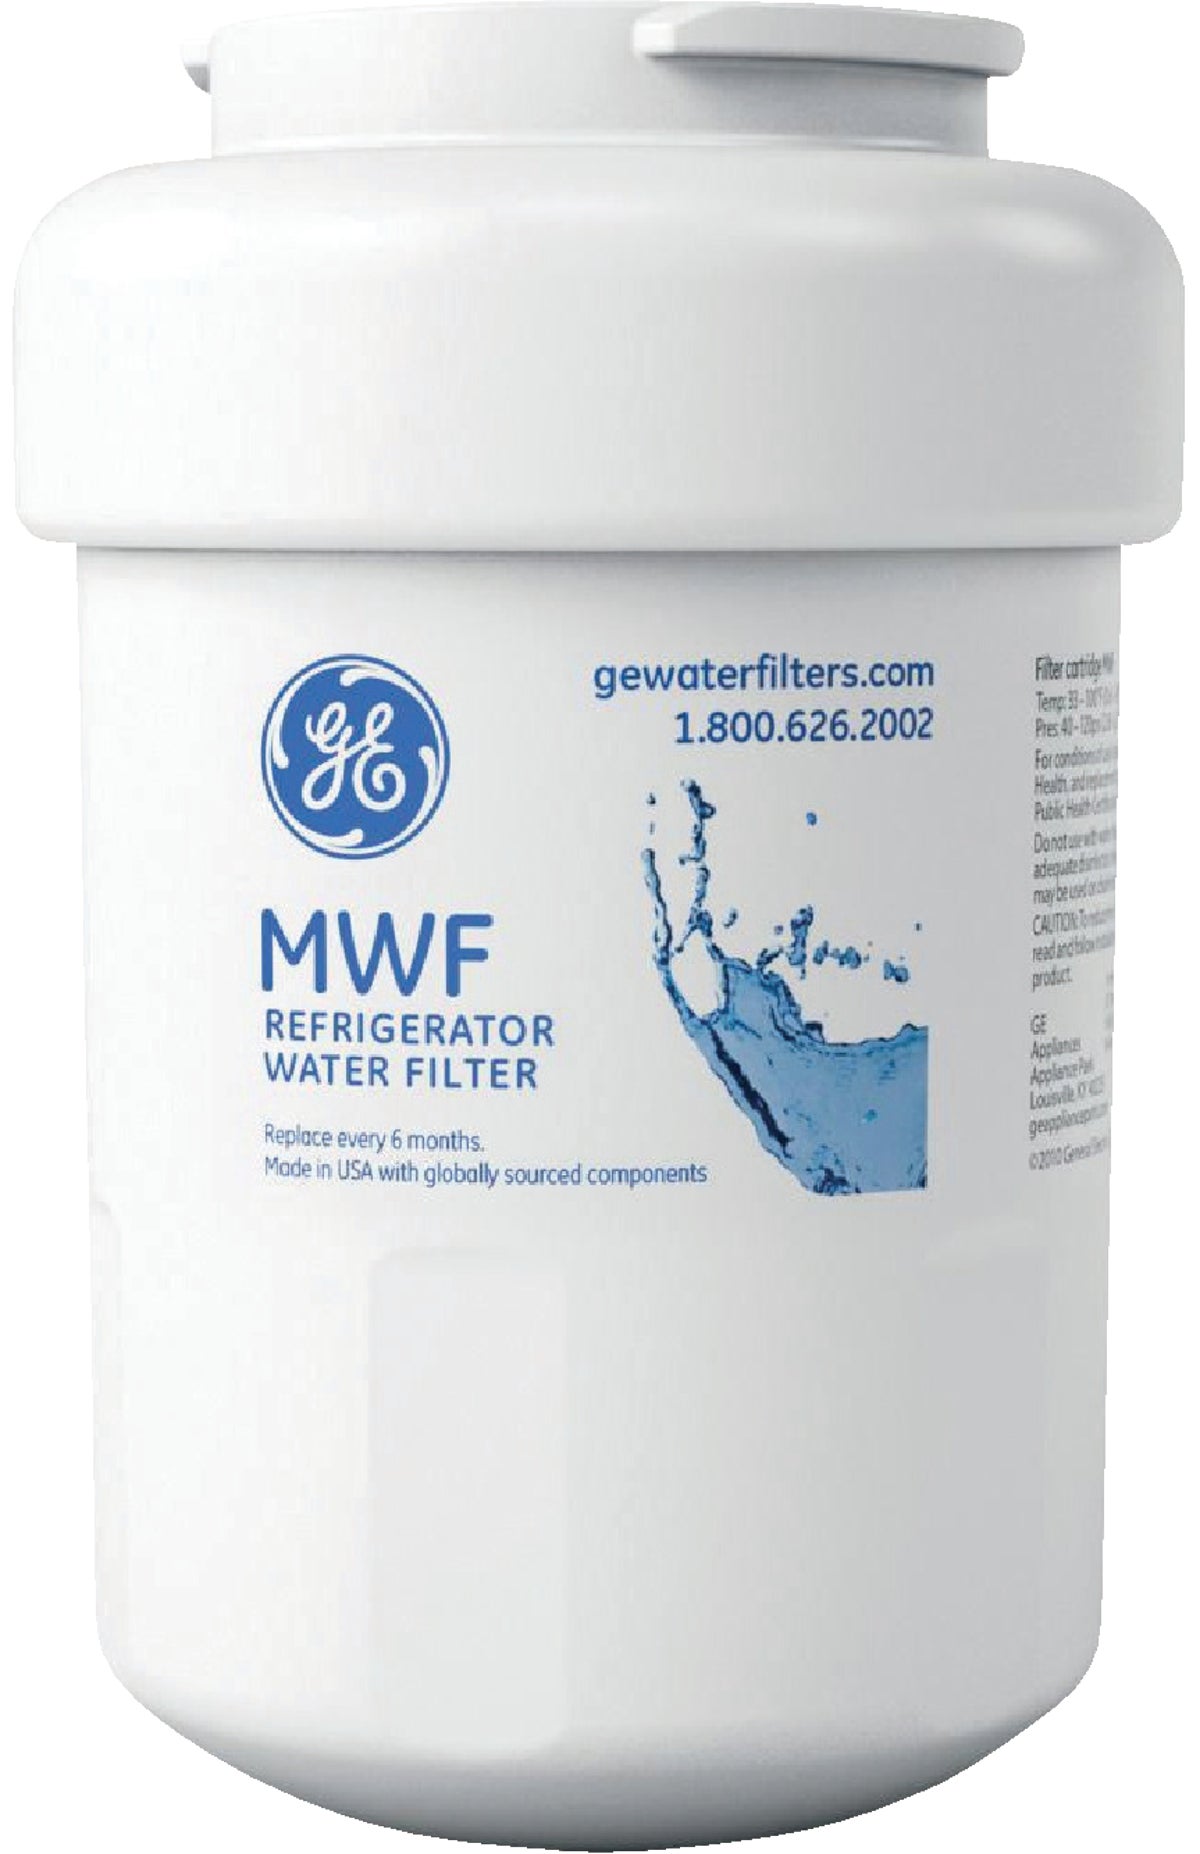 EveryDrop by Whirlpool Filter 3 Icemaker & Refrigerator Water